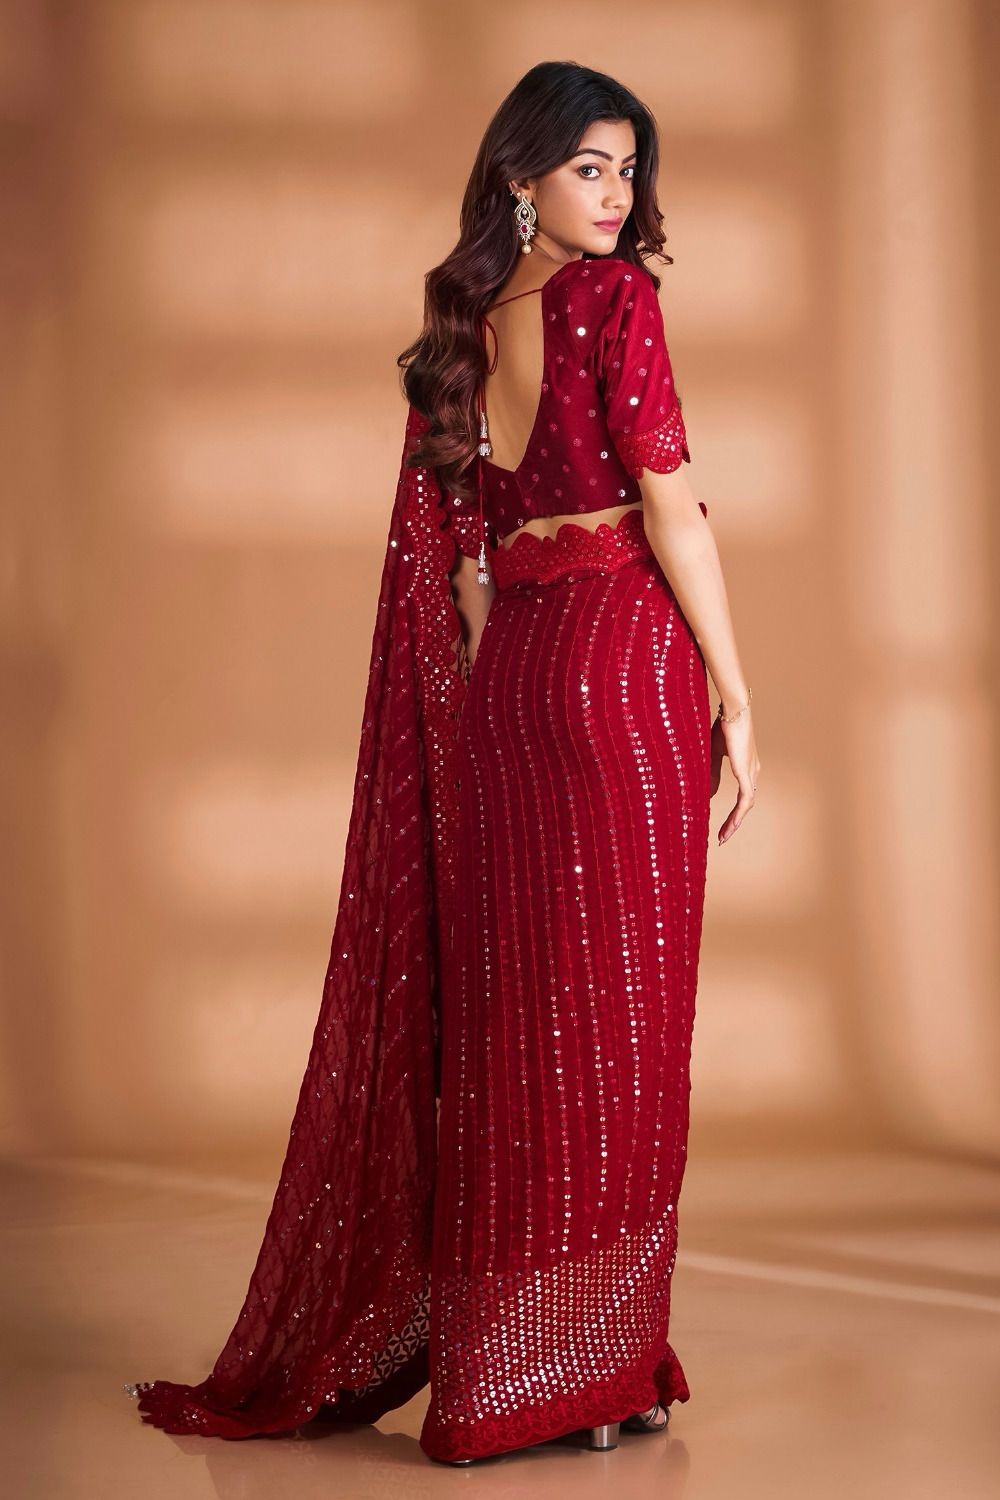 Shining Embroidery Work Red Color Beautiful Saree